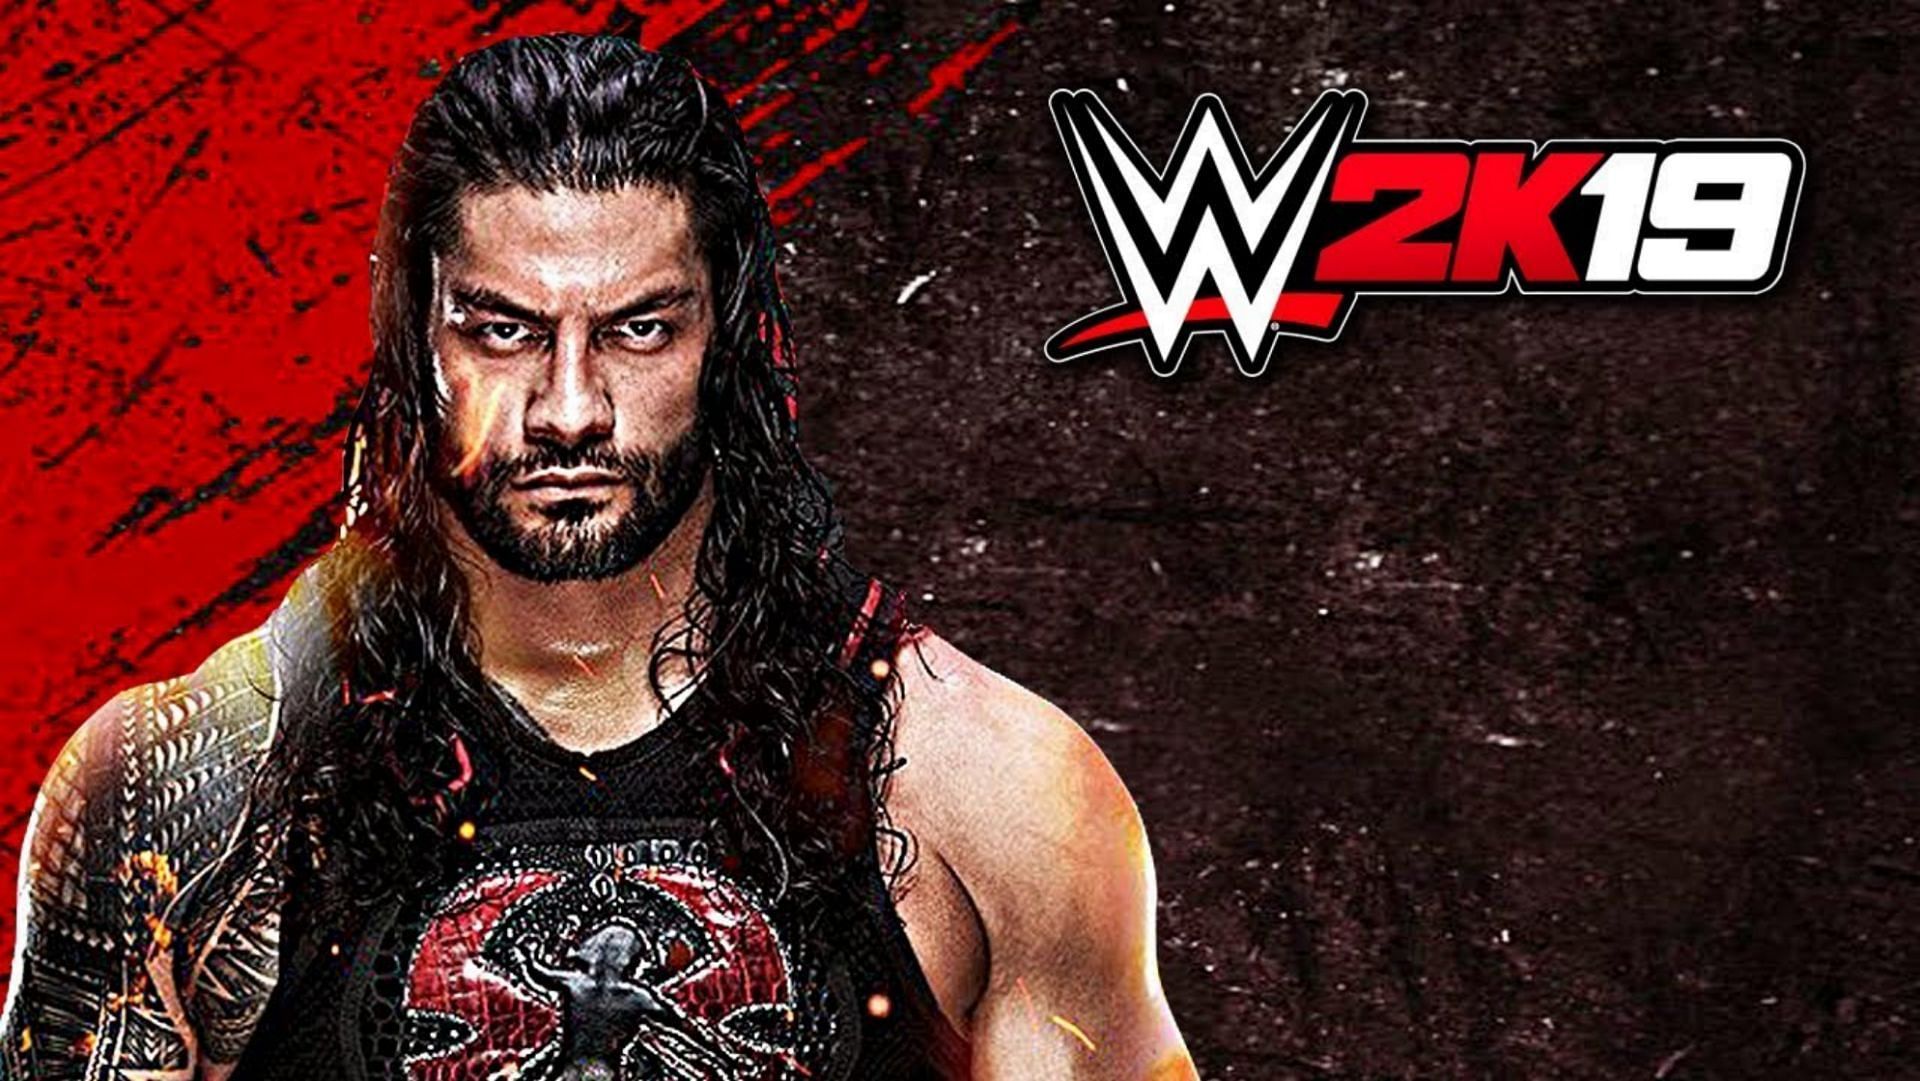 Several WWE 2K games have been delisted with no warning from the developers (Image via 2K)